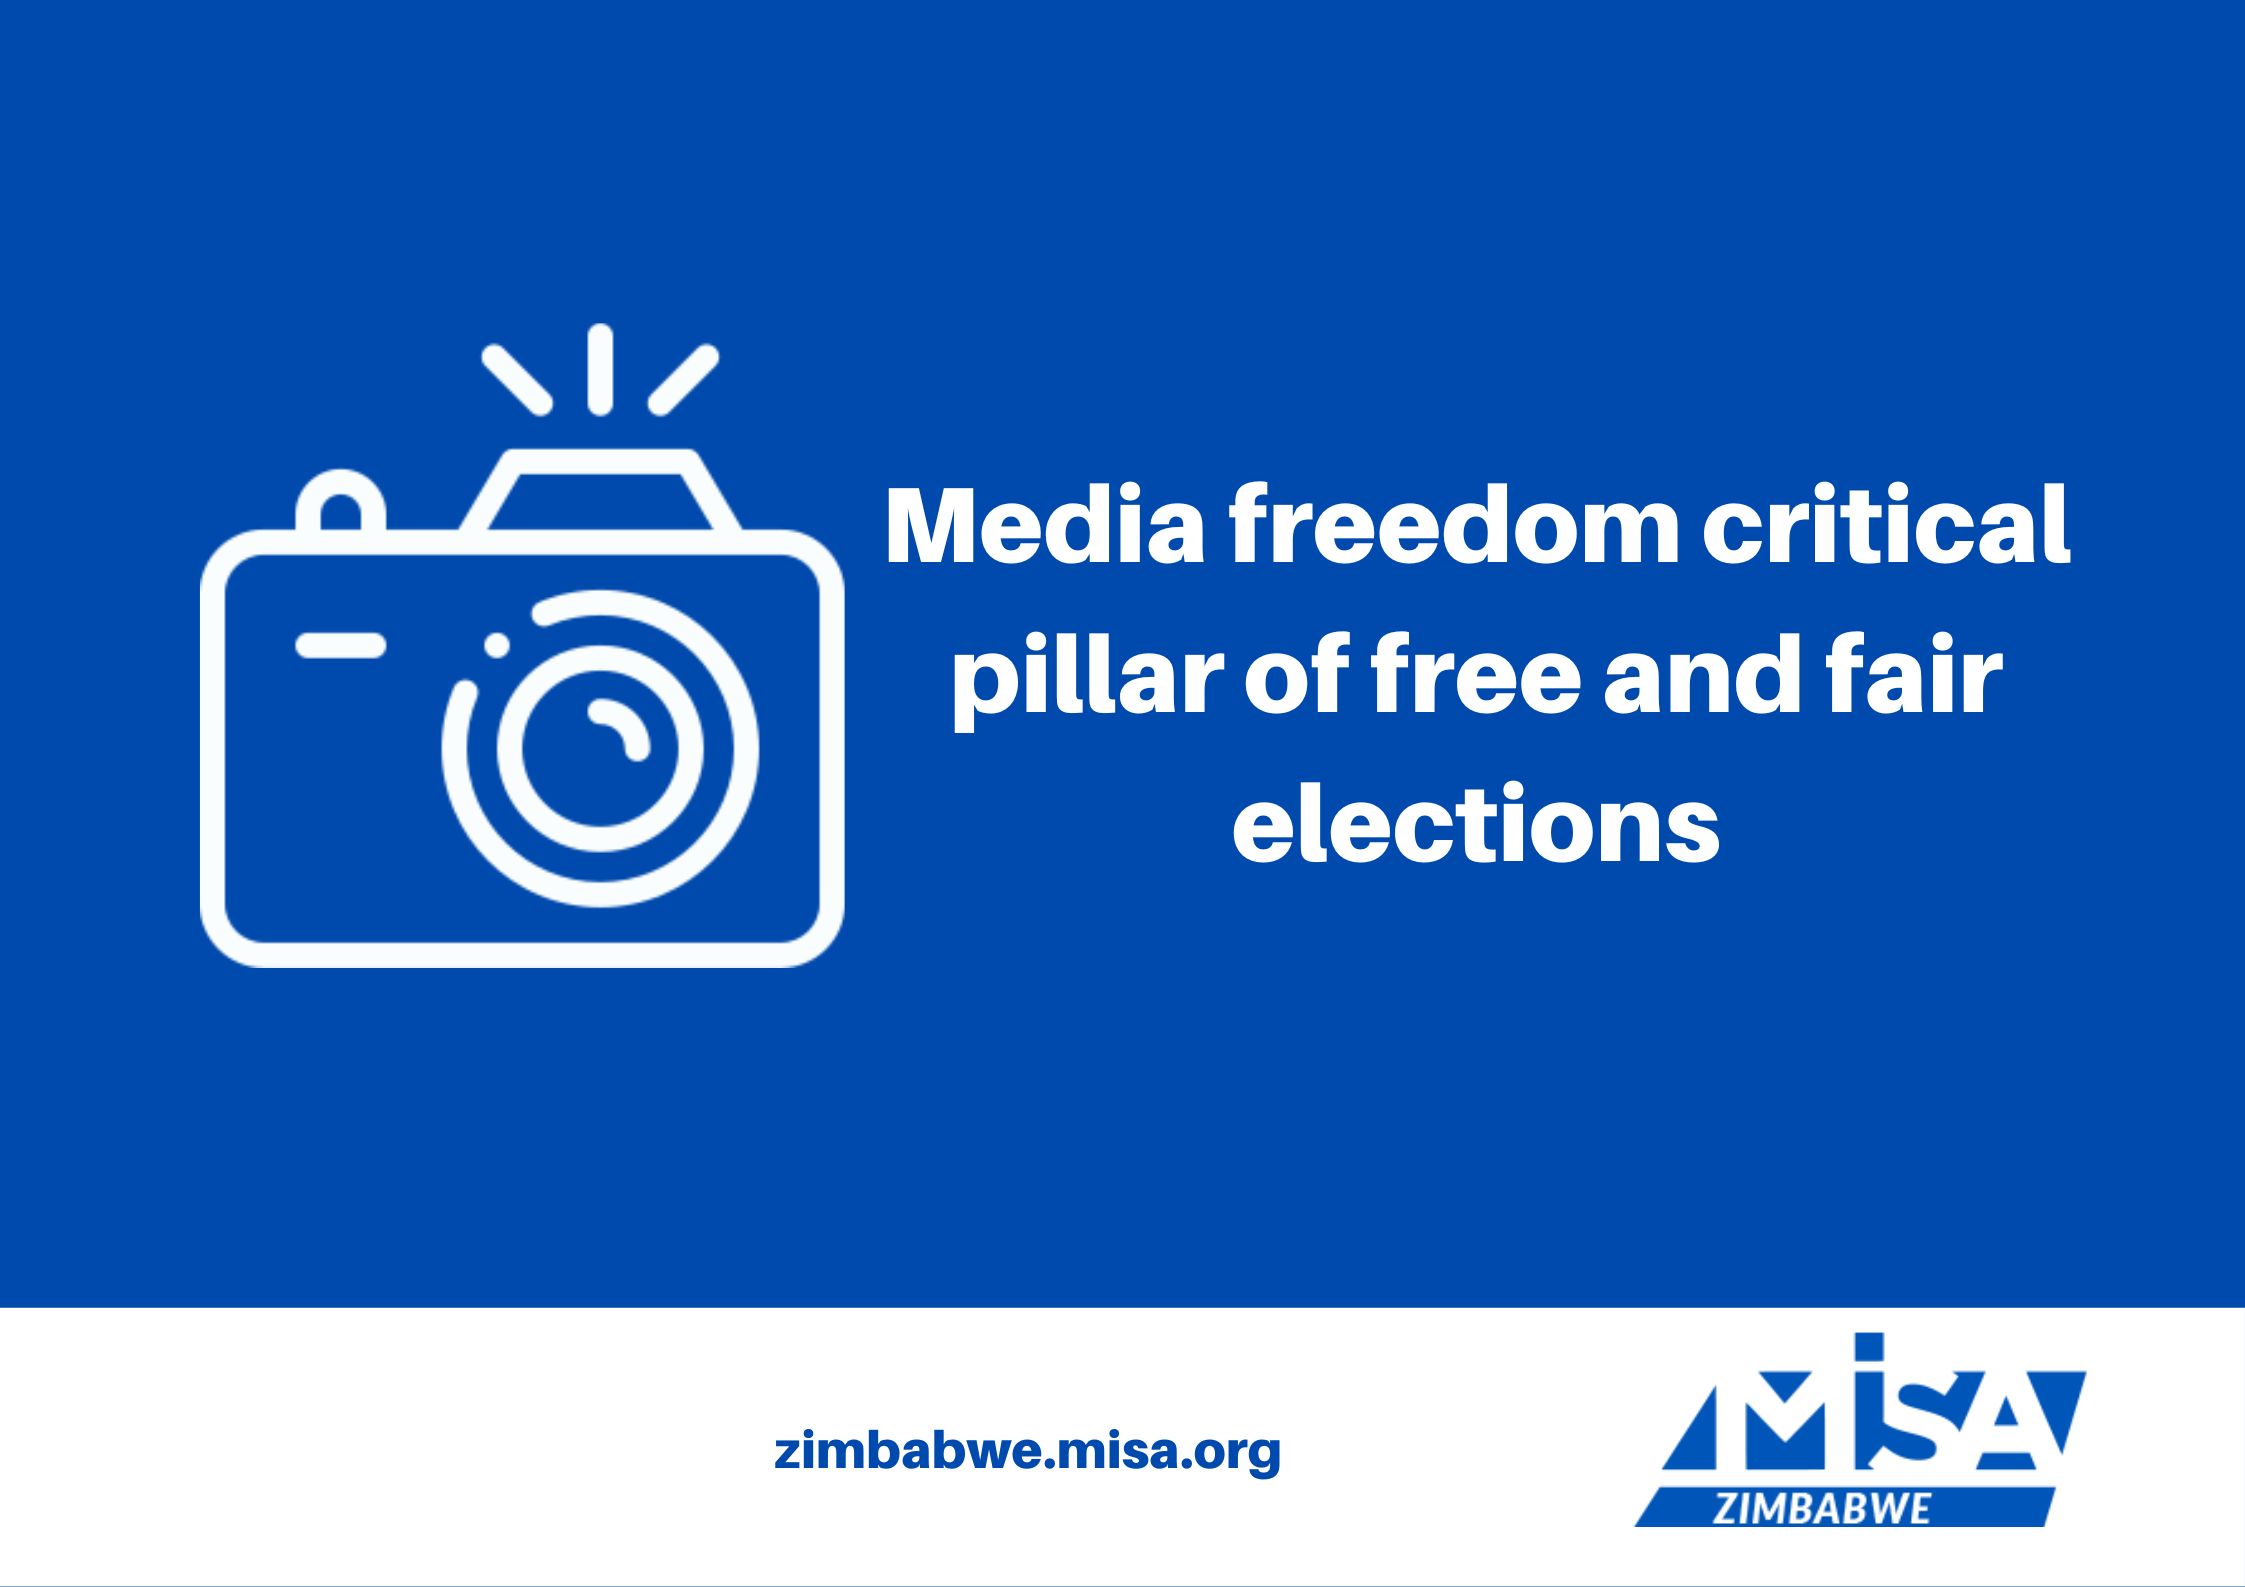 Media freedom critical pillar of free and fair elections